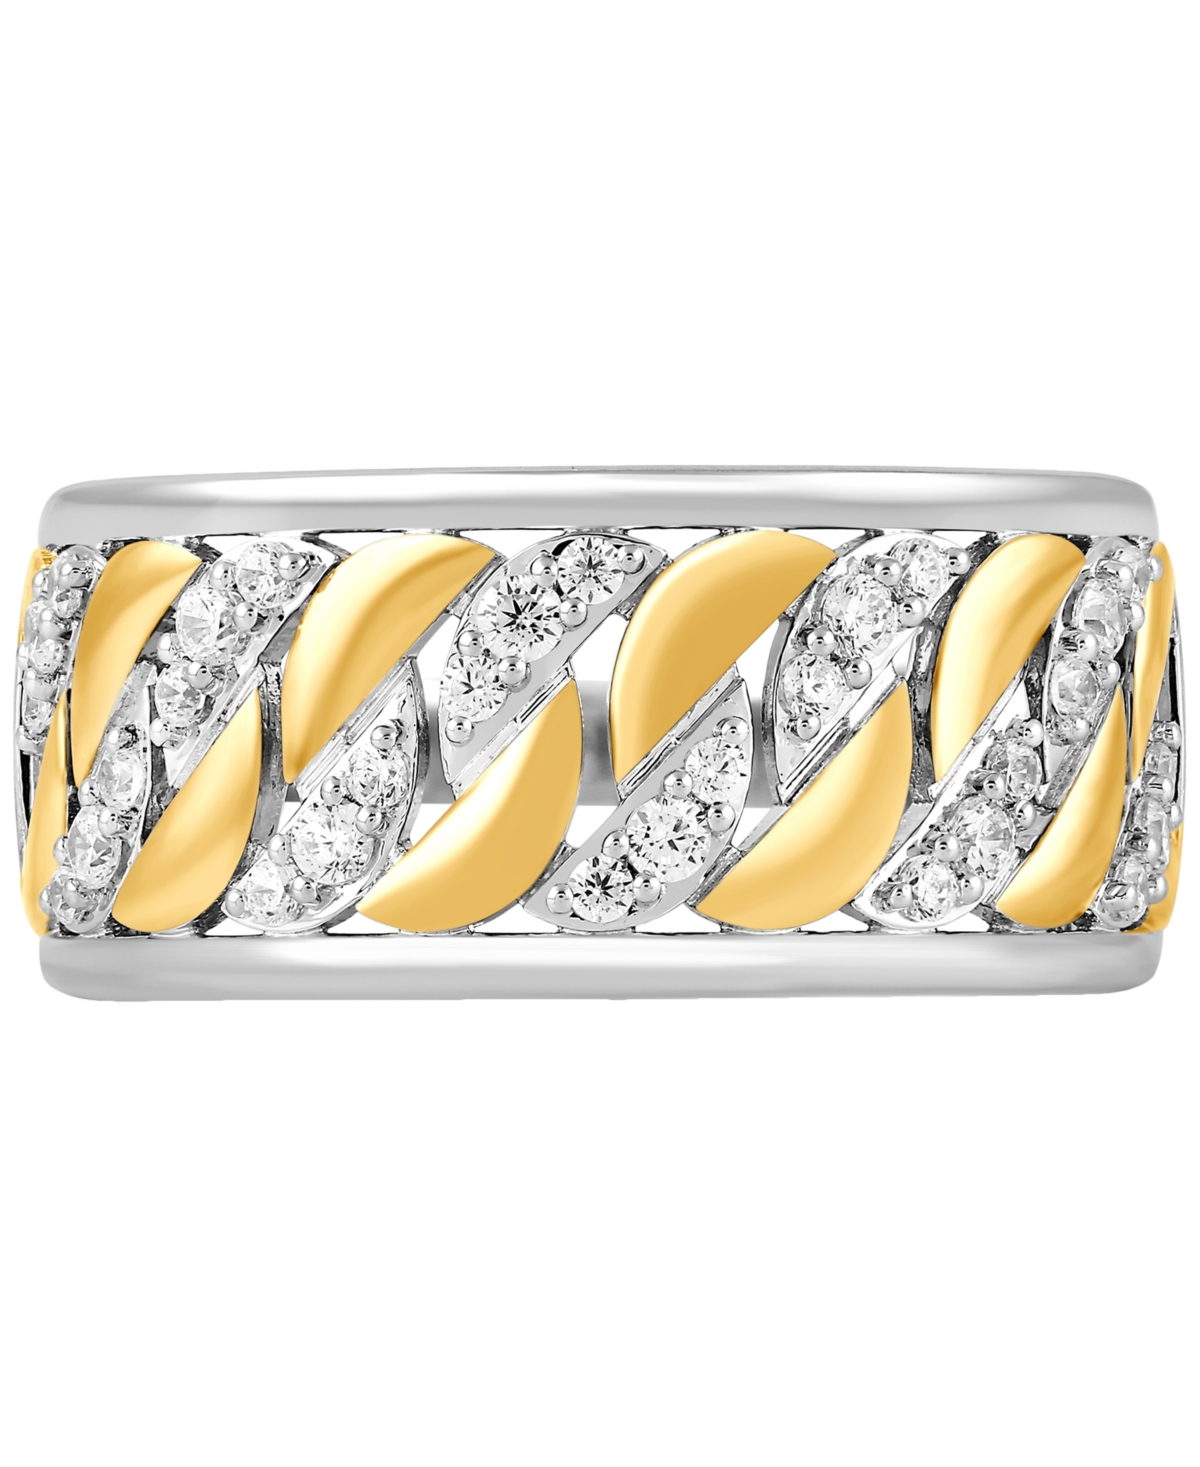 Men's Diamond Chain Link Inspired Ring (1/2 ct. t.w.) in Sterling Silver & 18k Gold-Plate - Gold Over Silver